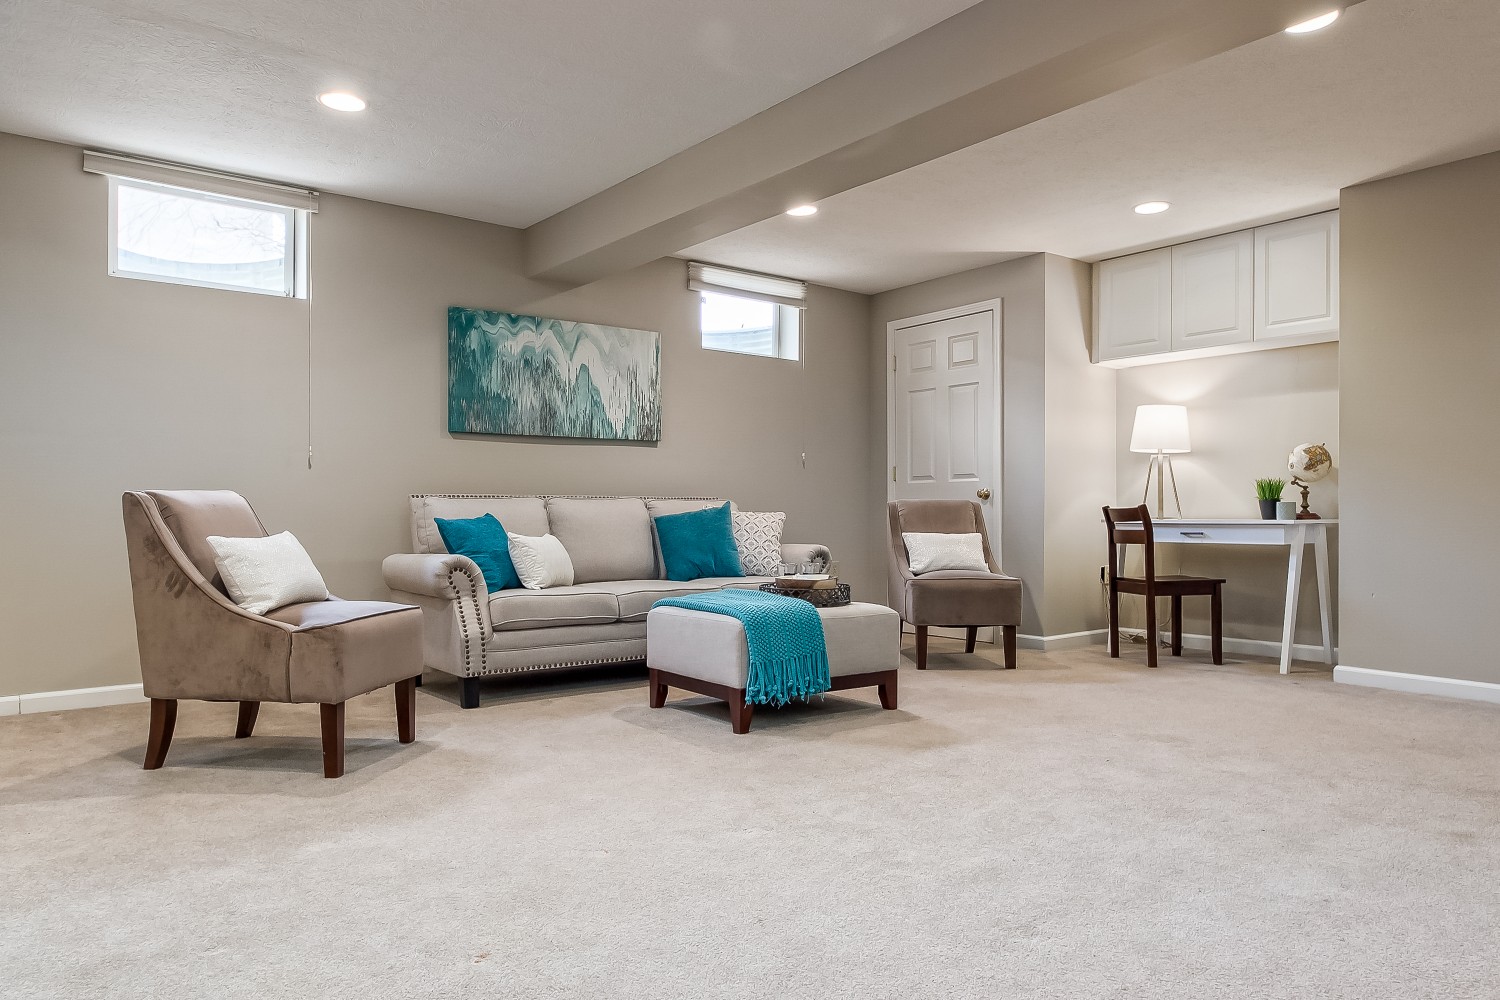 Staged by Sanctuary Staging